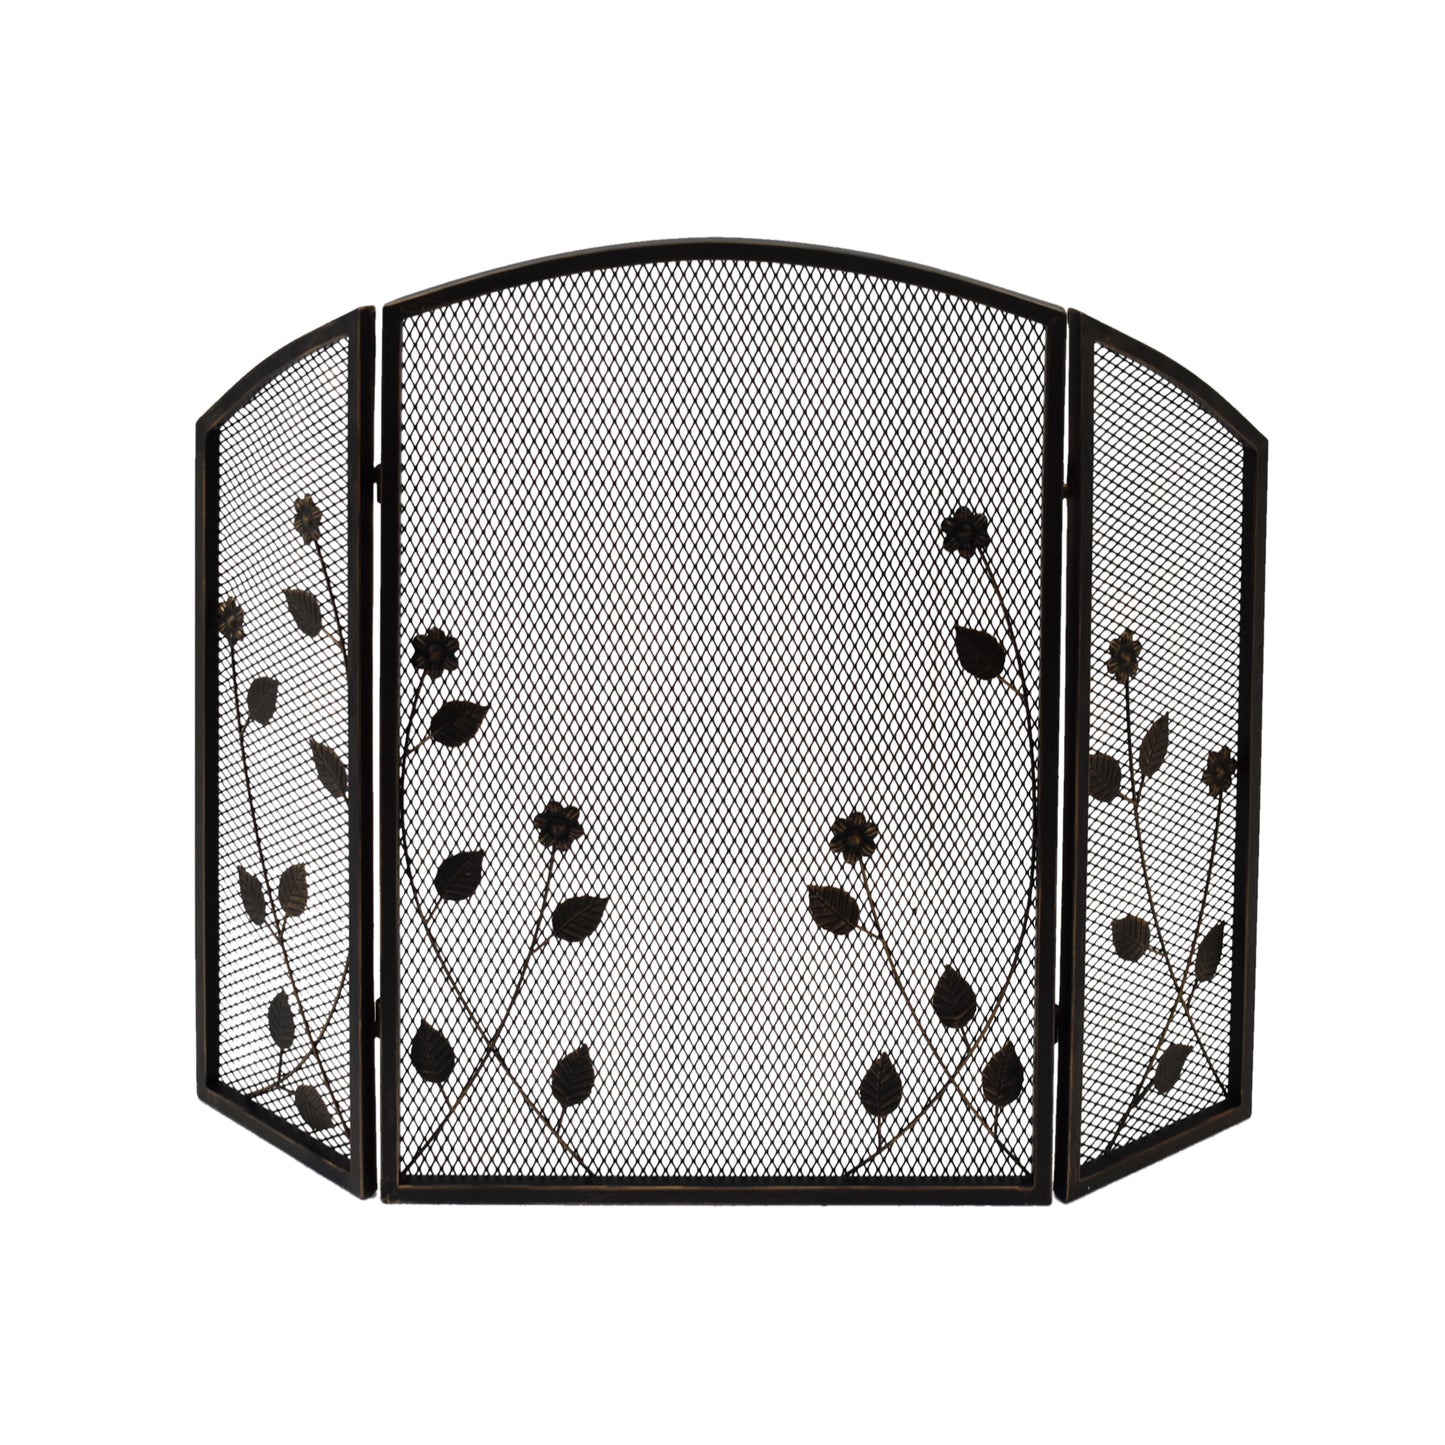 Jenna Modern Iron Firescreen with Leaf Accents